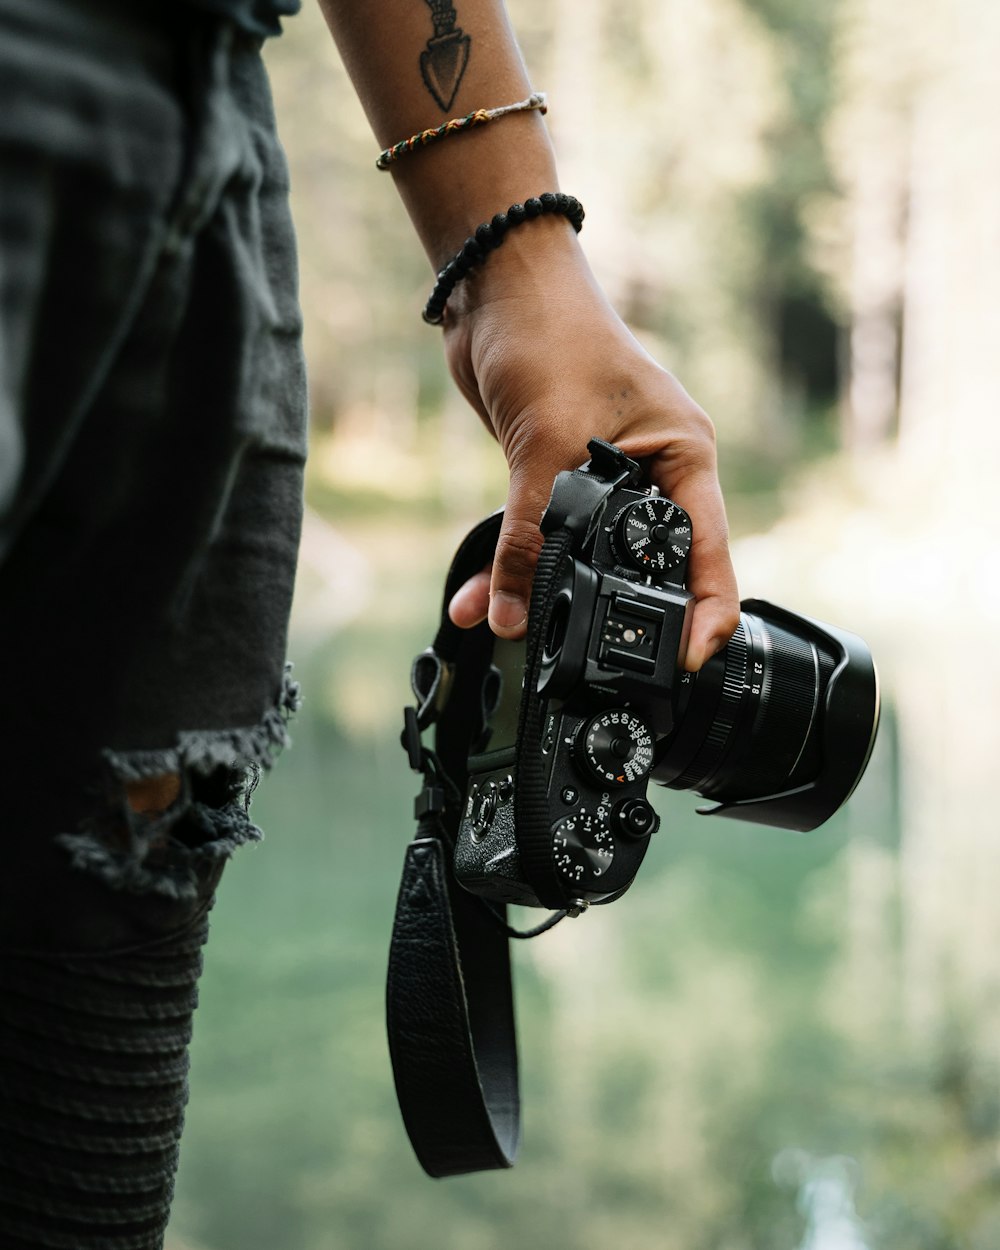 Best 500+ Camera Photos [HD] | Download Free Images & Stock Photos On  Unsplash